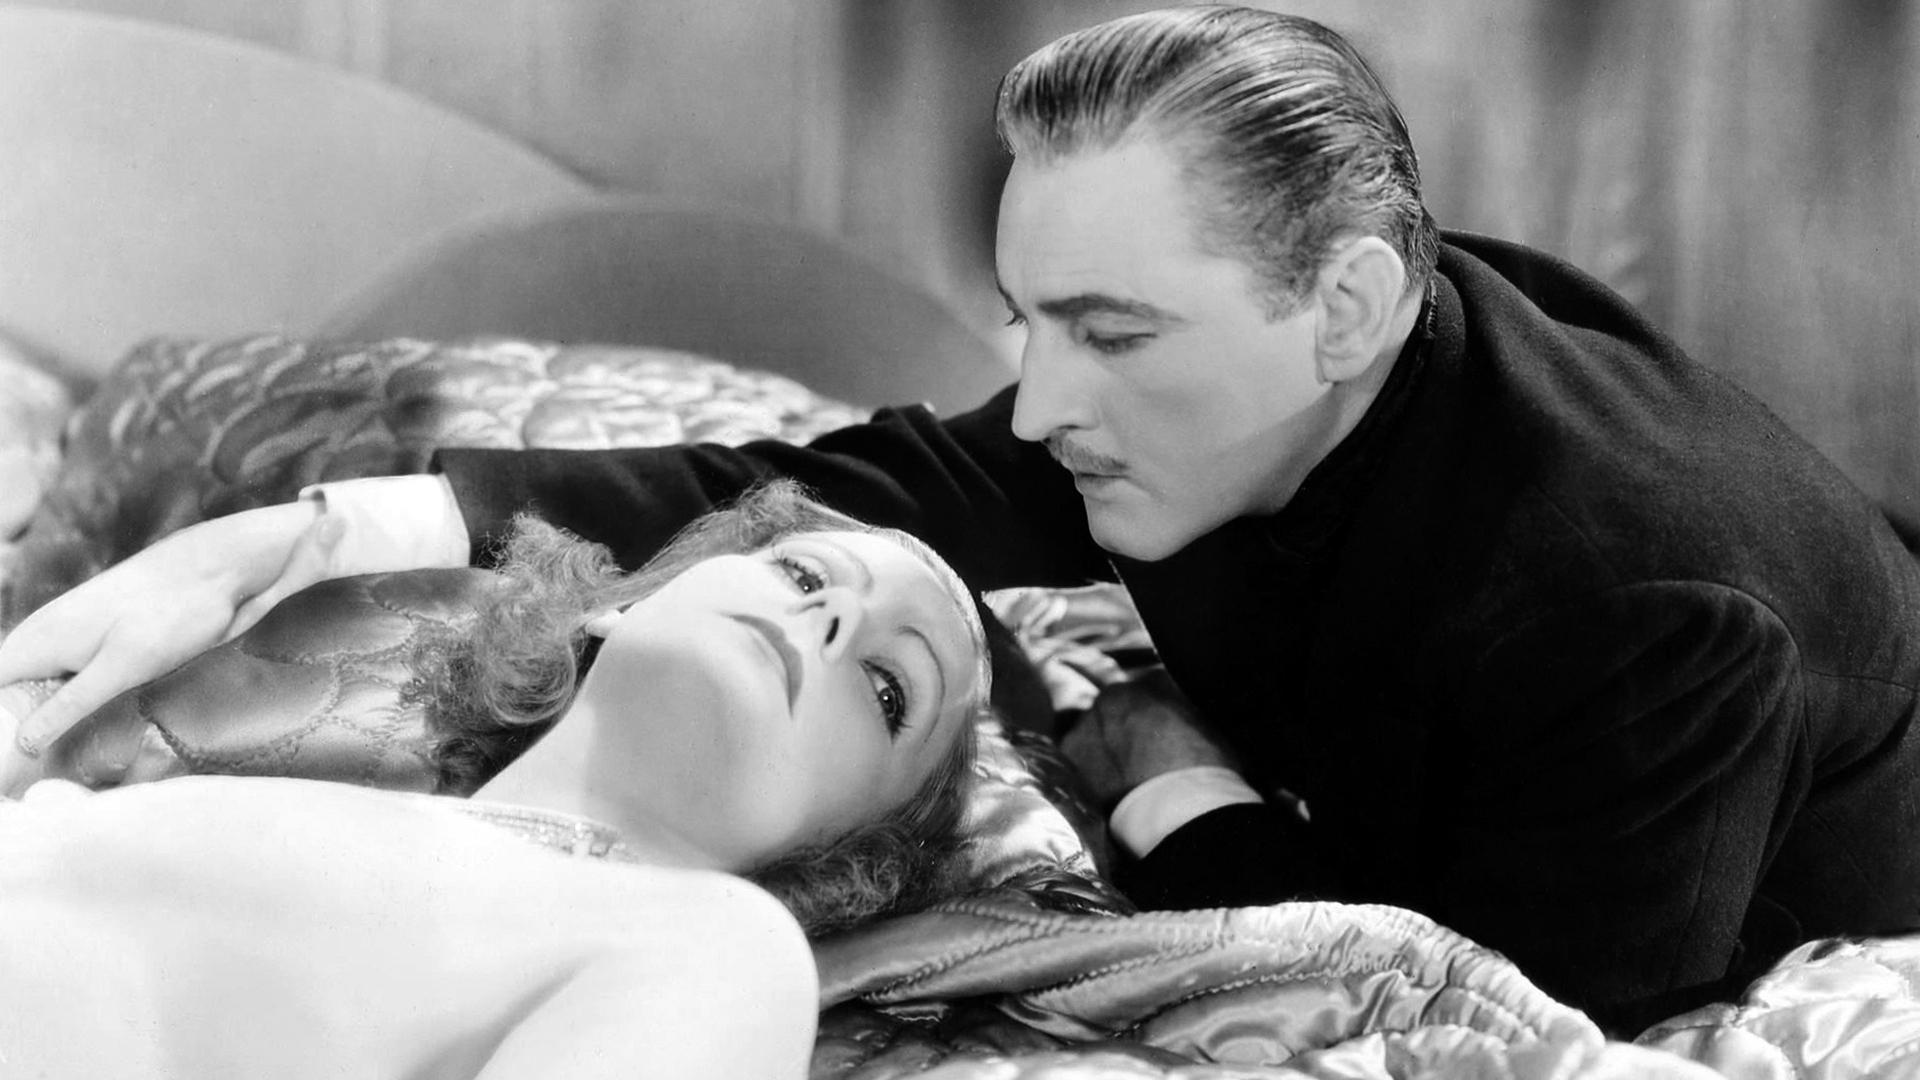 Grand Hotel 1932 Best Picture Oscar Starring Garbo The Barrymores John And Lionel Joan Crawford Emanuel Levy